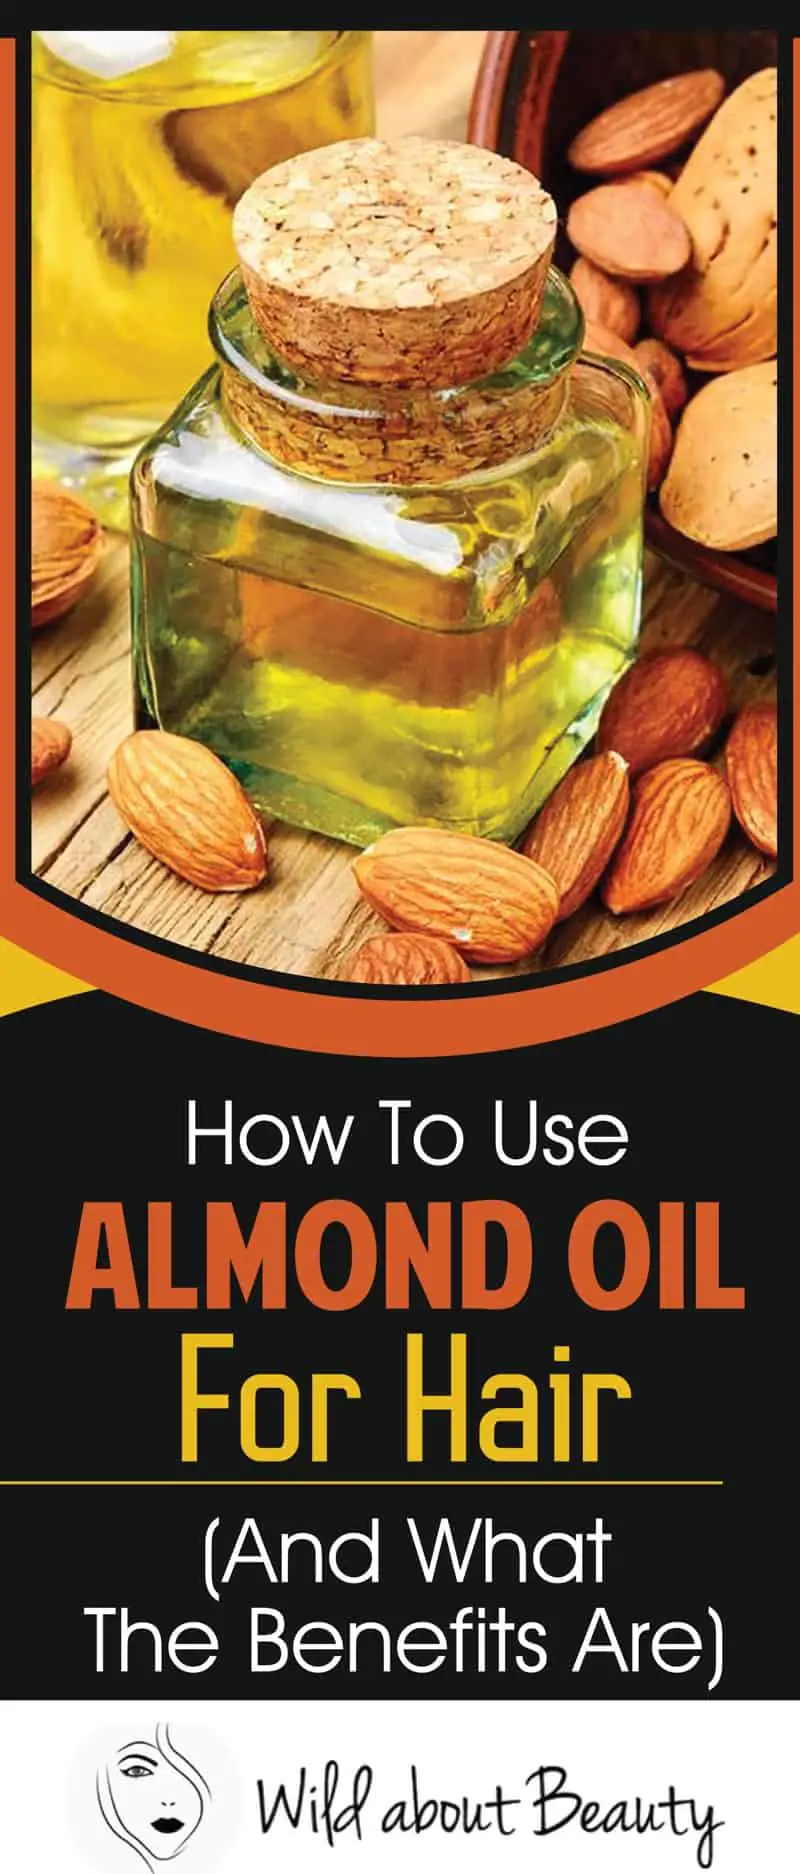 Discover The Benefits Of Adding Almond Oil To Your Shampoo Routine ...